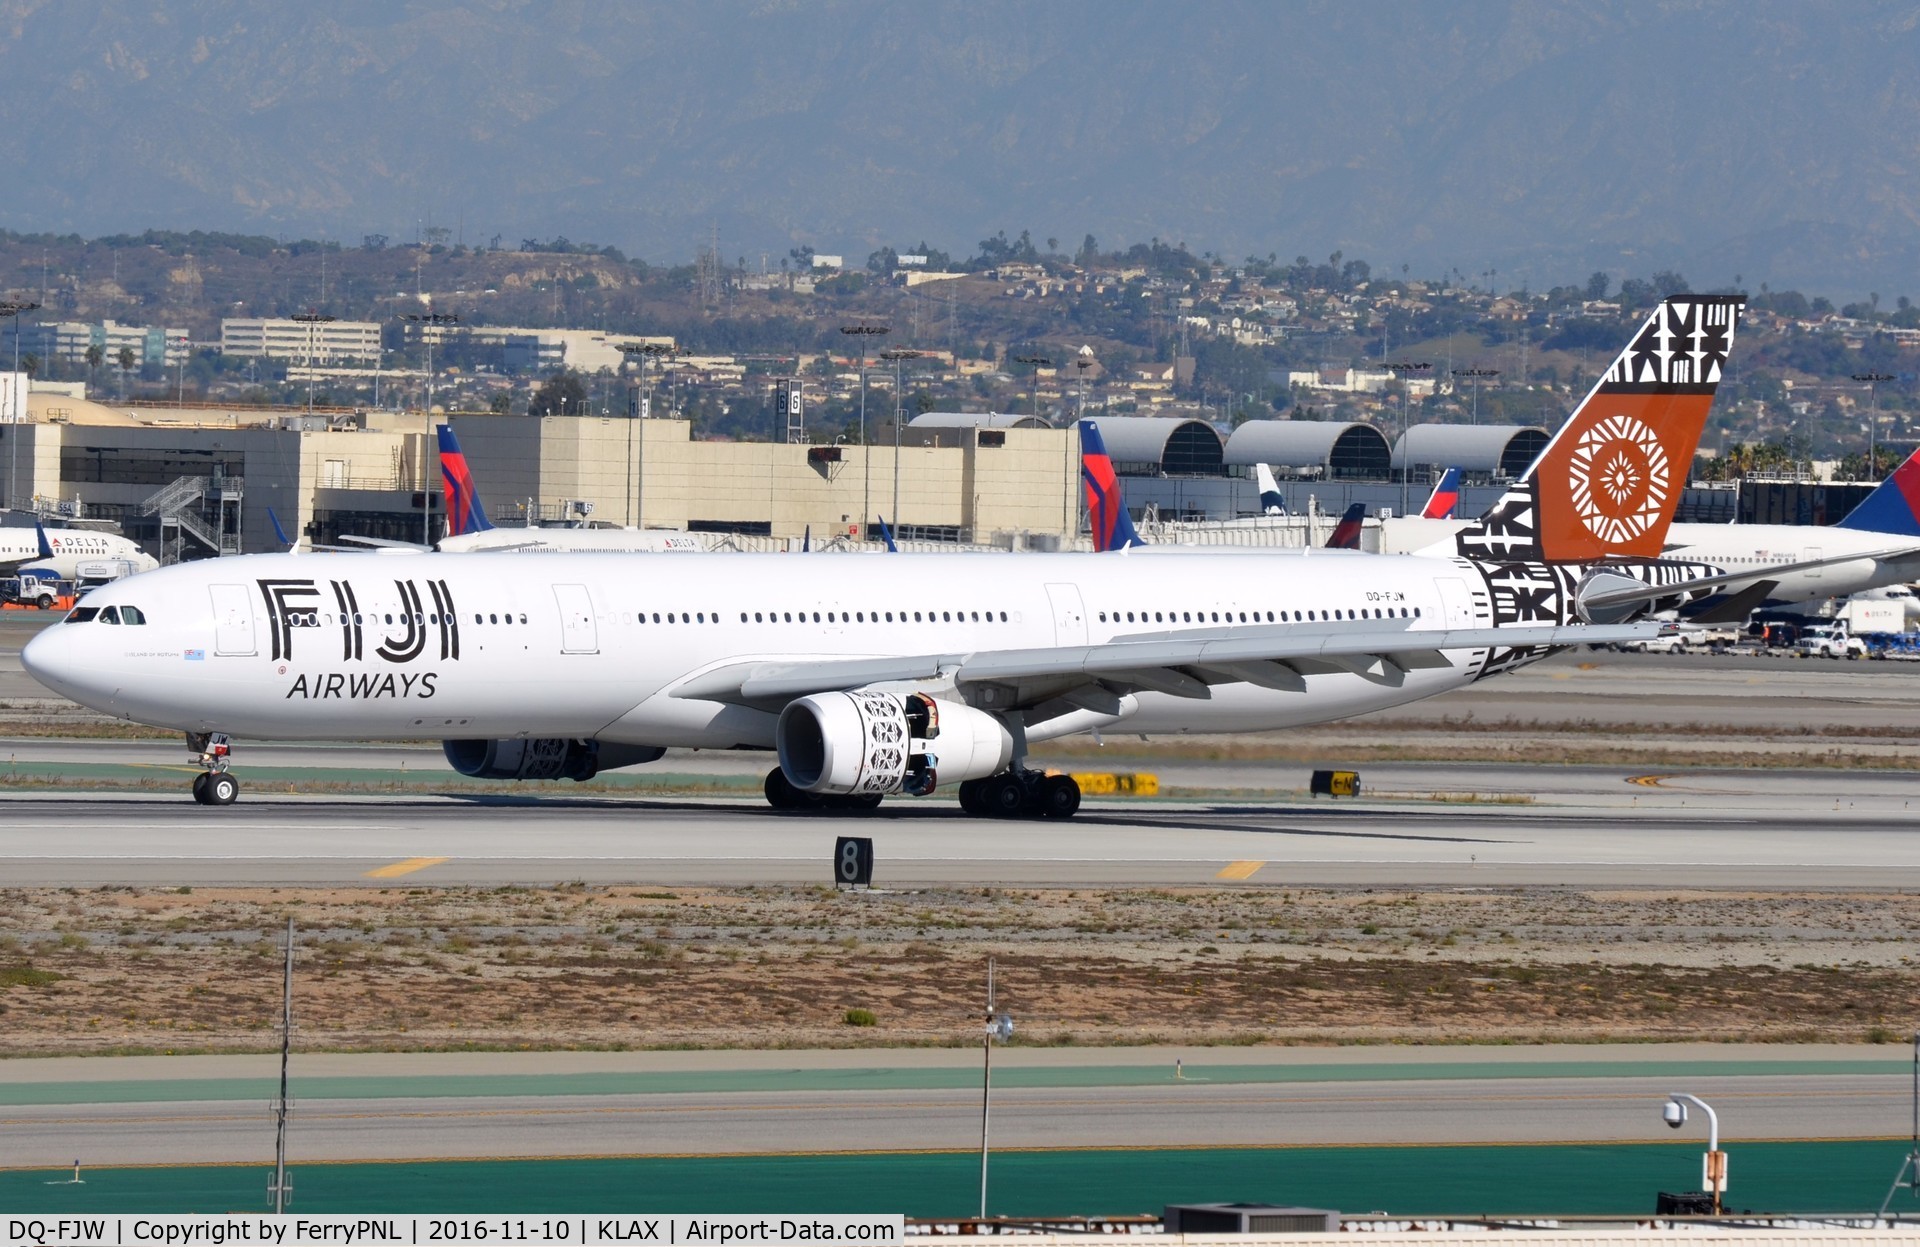 DQ-FJW, 2015 Airbus A330-343 C/N 1692, Fiji A333 arriving in LAX